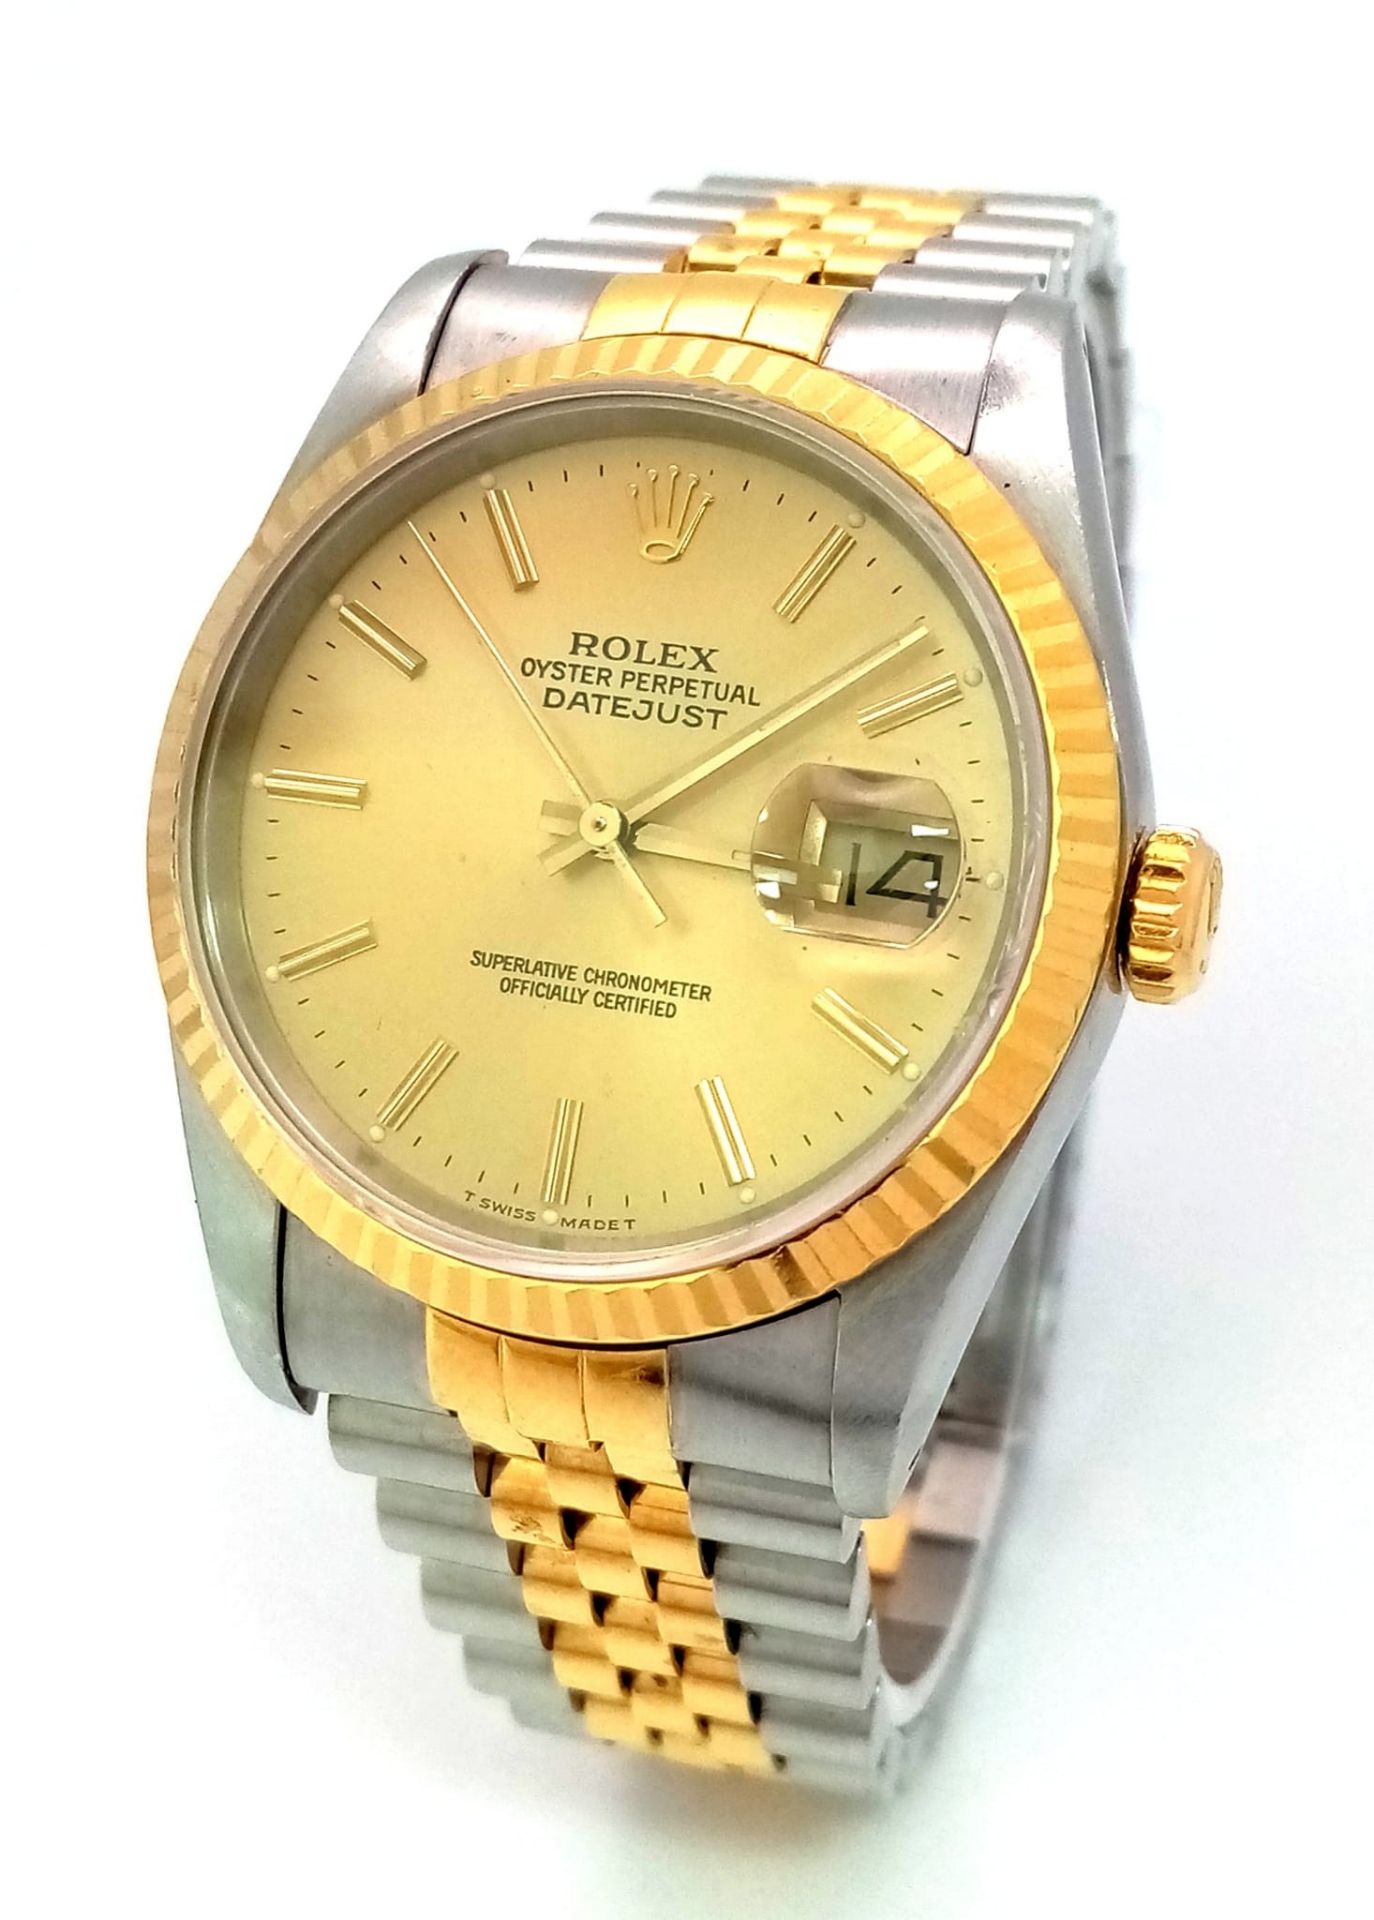 A Rolex Oyster Perpetual Datejust Gents Watch. Bi-metal strap and case - 36mm. Gold tone dial. - Image 3 of 5